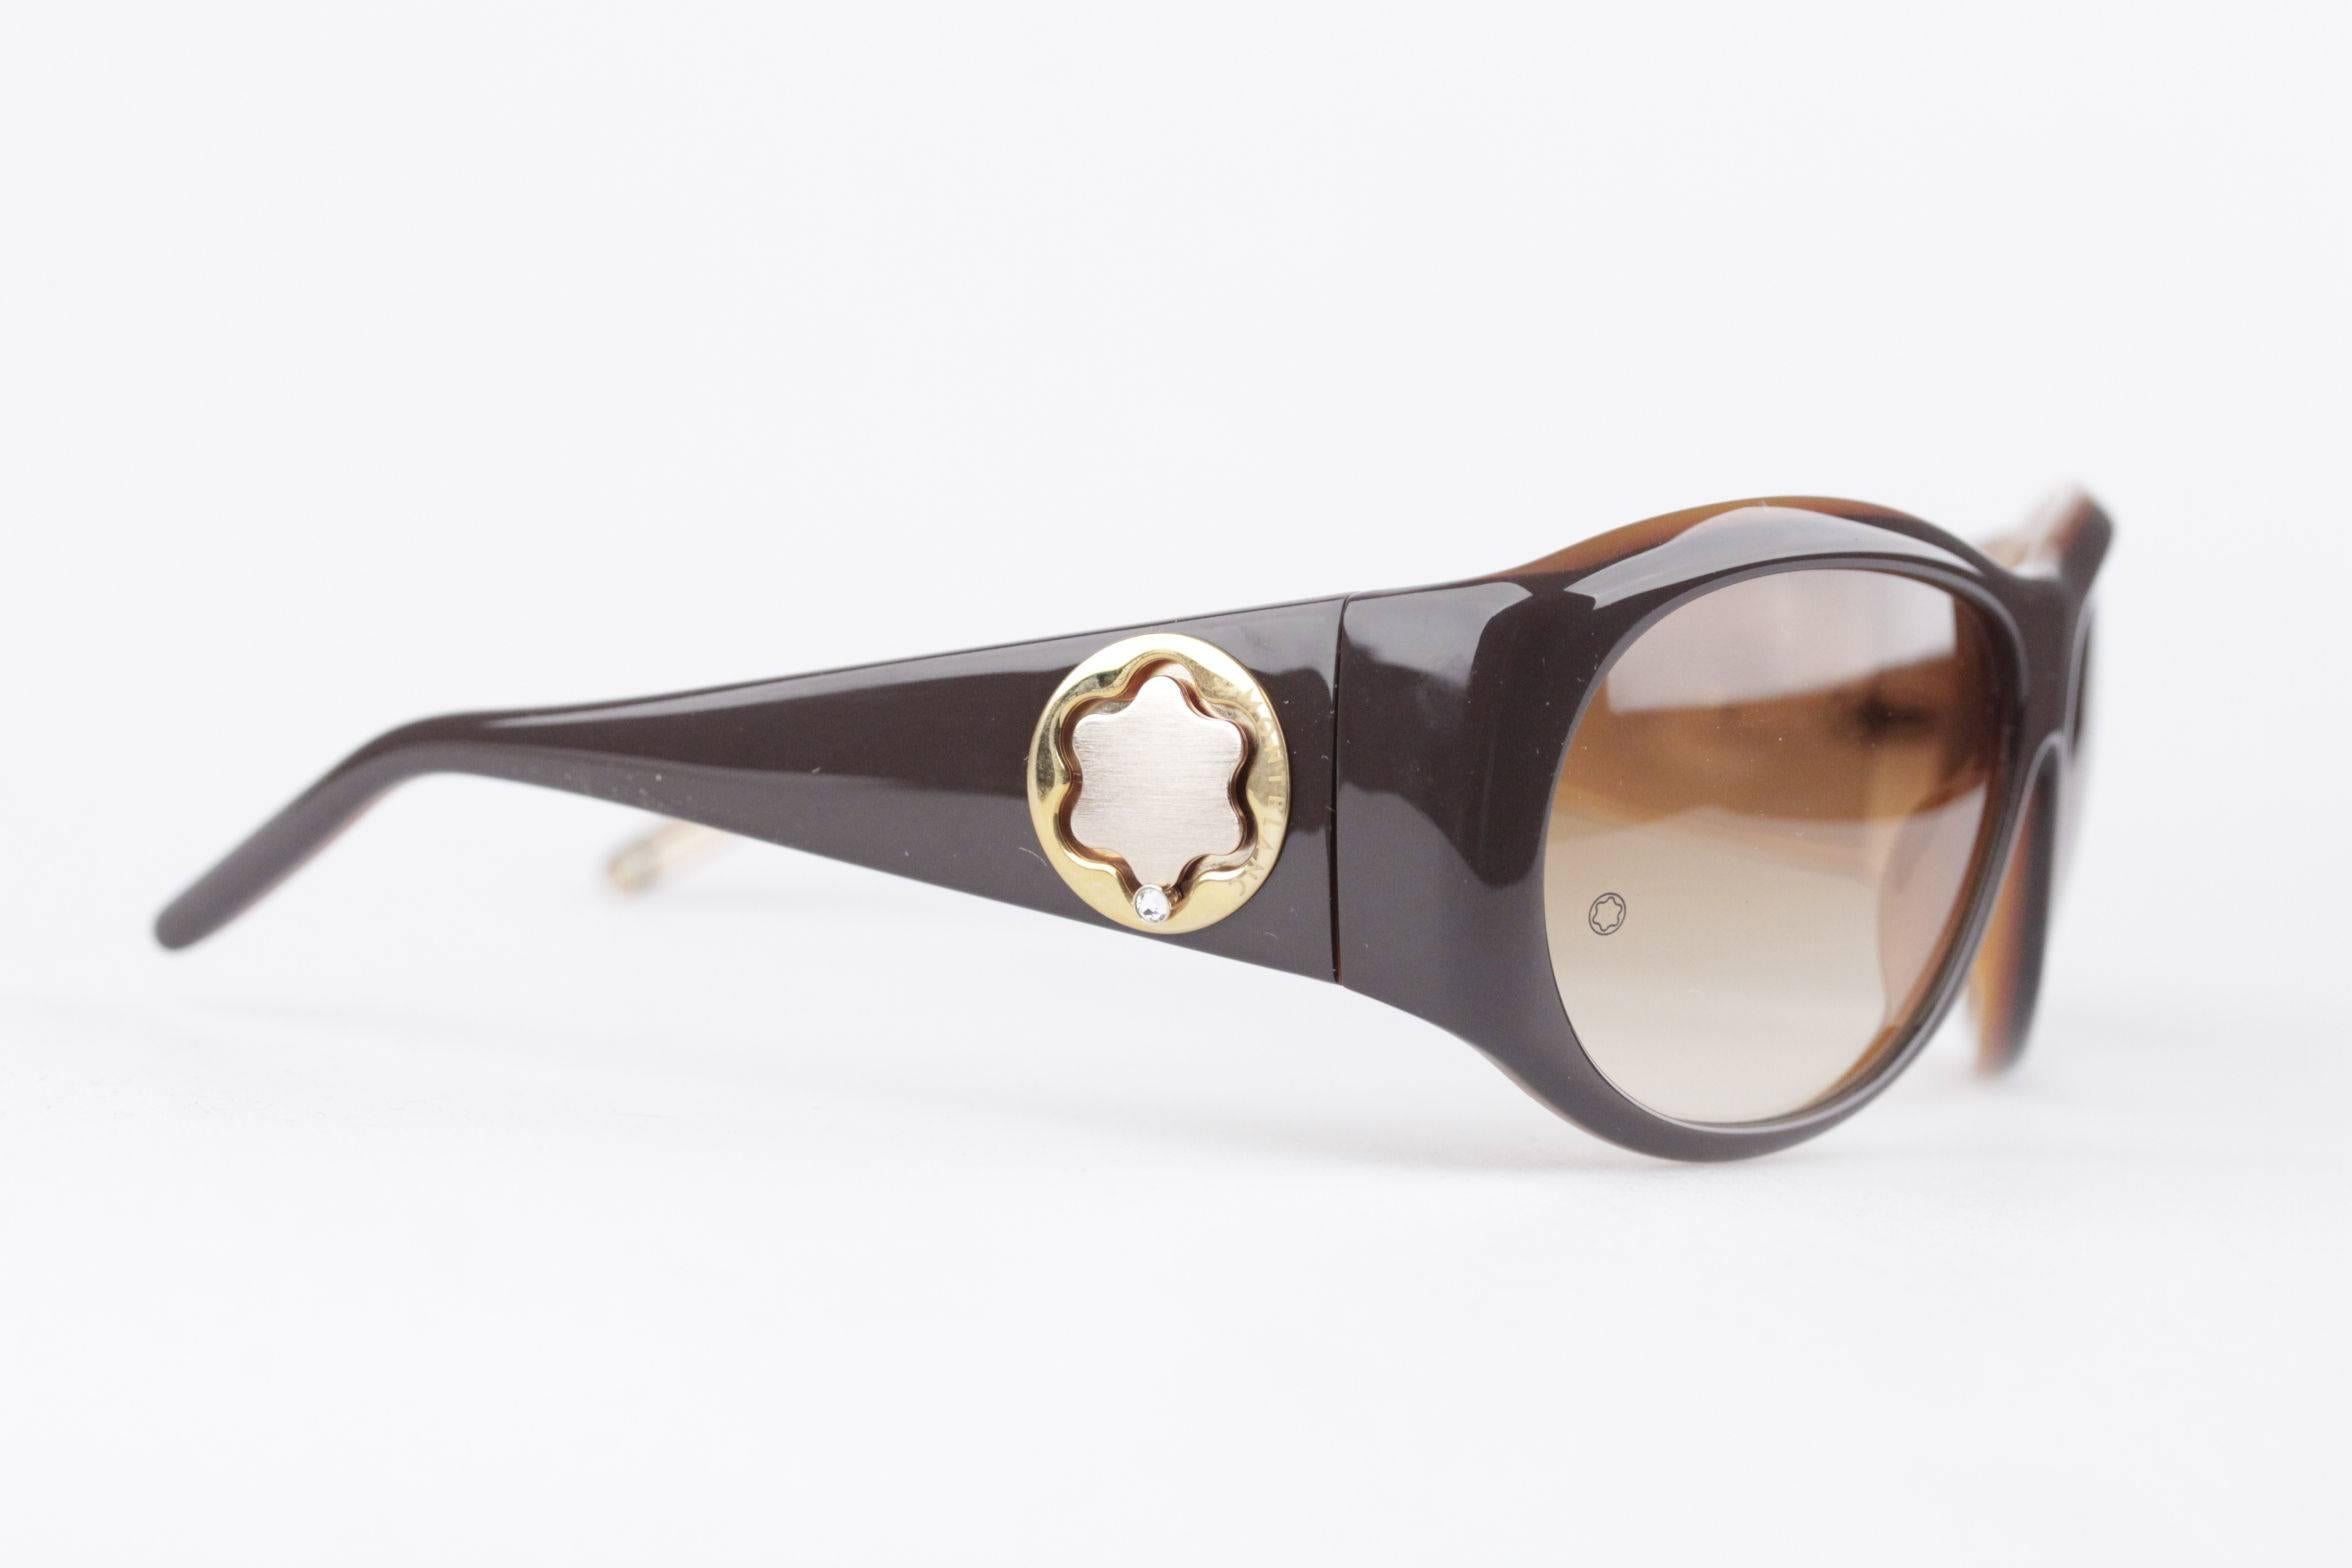 - Women sunglasses, signed MONTBLANC (Made in Italy)

- Light rown gradient ens (original lens w/ MONTBLANC logo)

- 100% UV protection

- Brown acetate frame

- Gold metal MONTBLANC logo on temples with rhinestone embellishment

Style